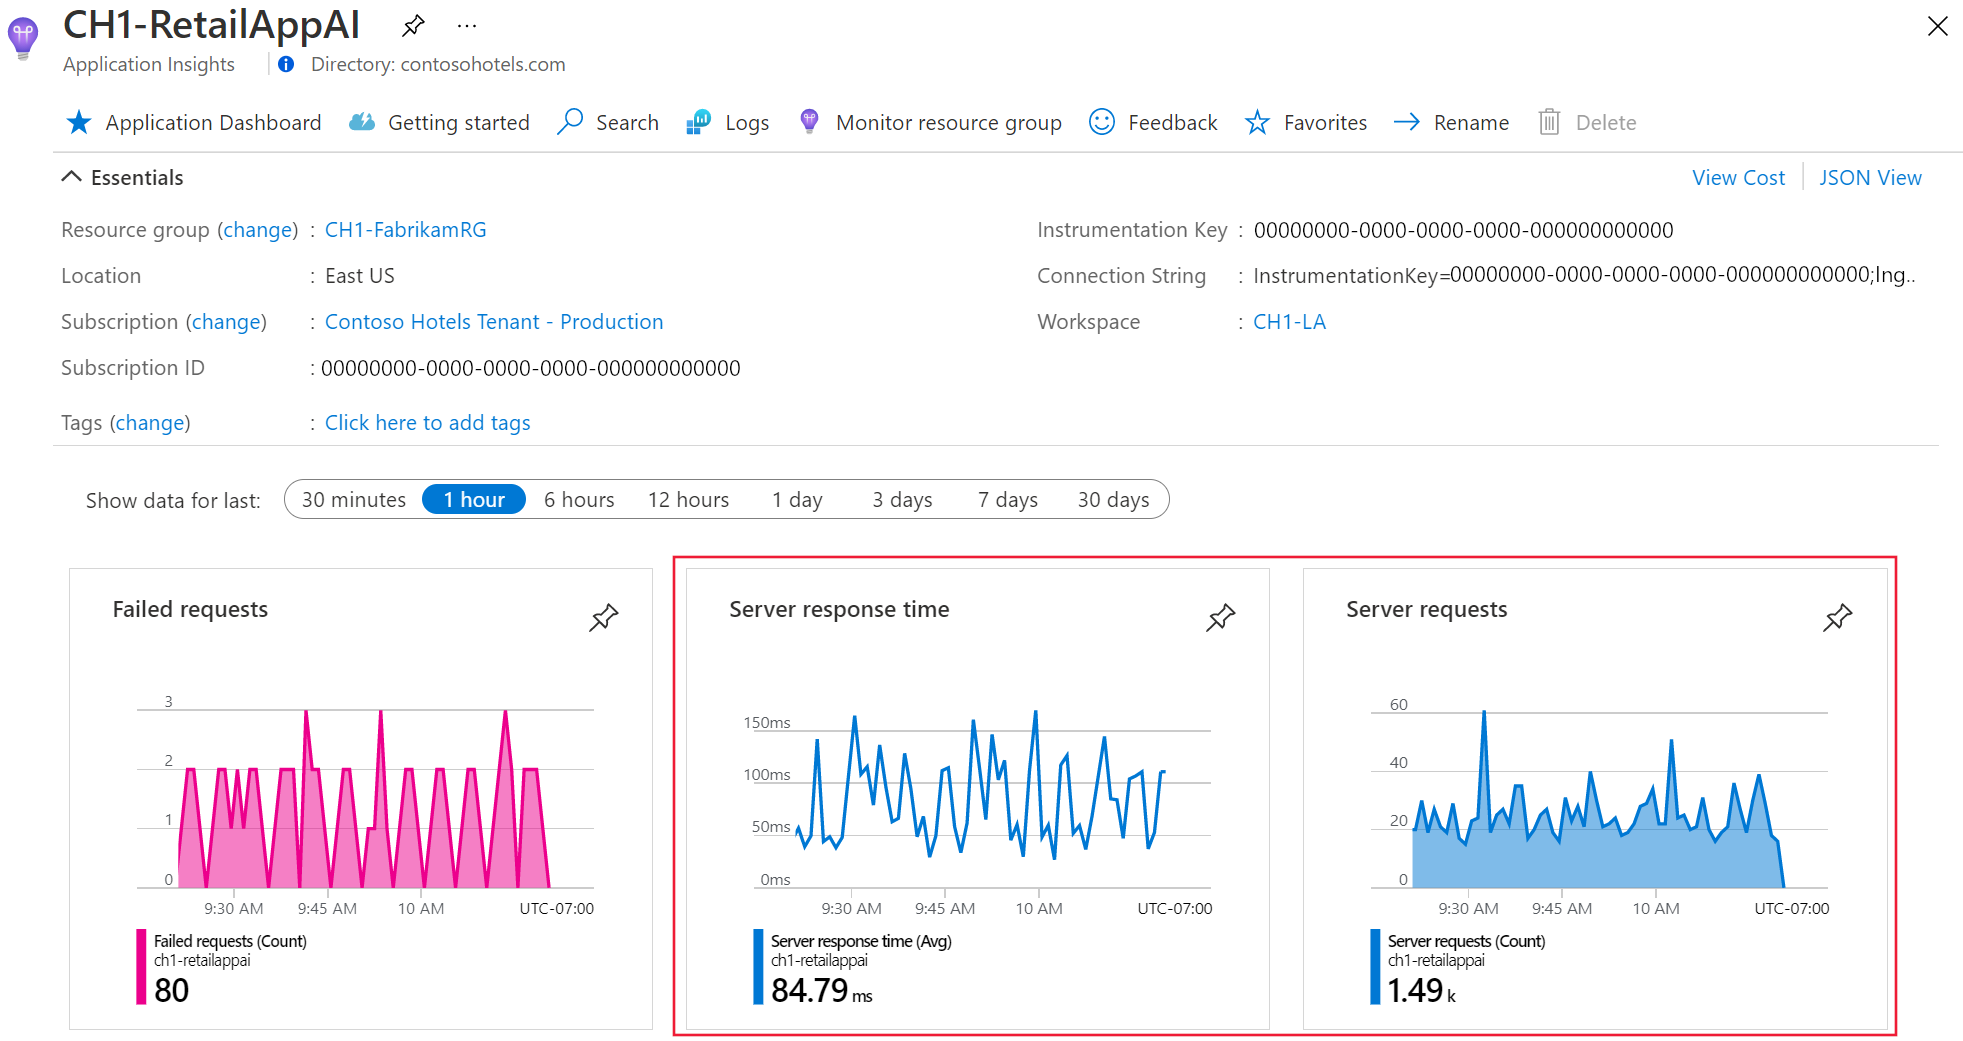 Screenshot that shows the Application Insights Overview tab with server requests and server response time highlighted.